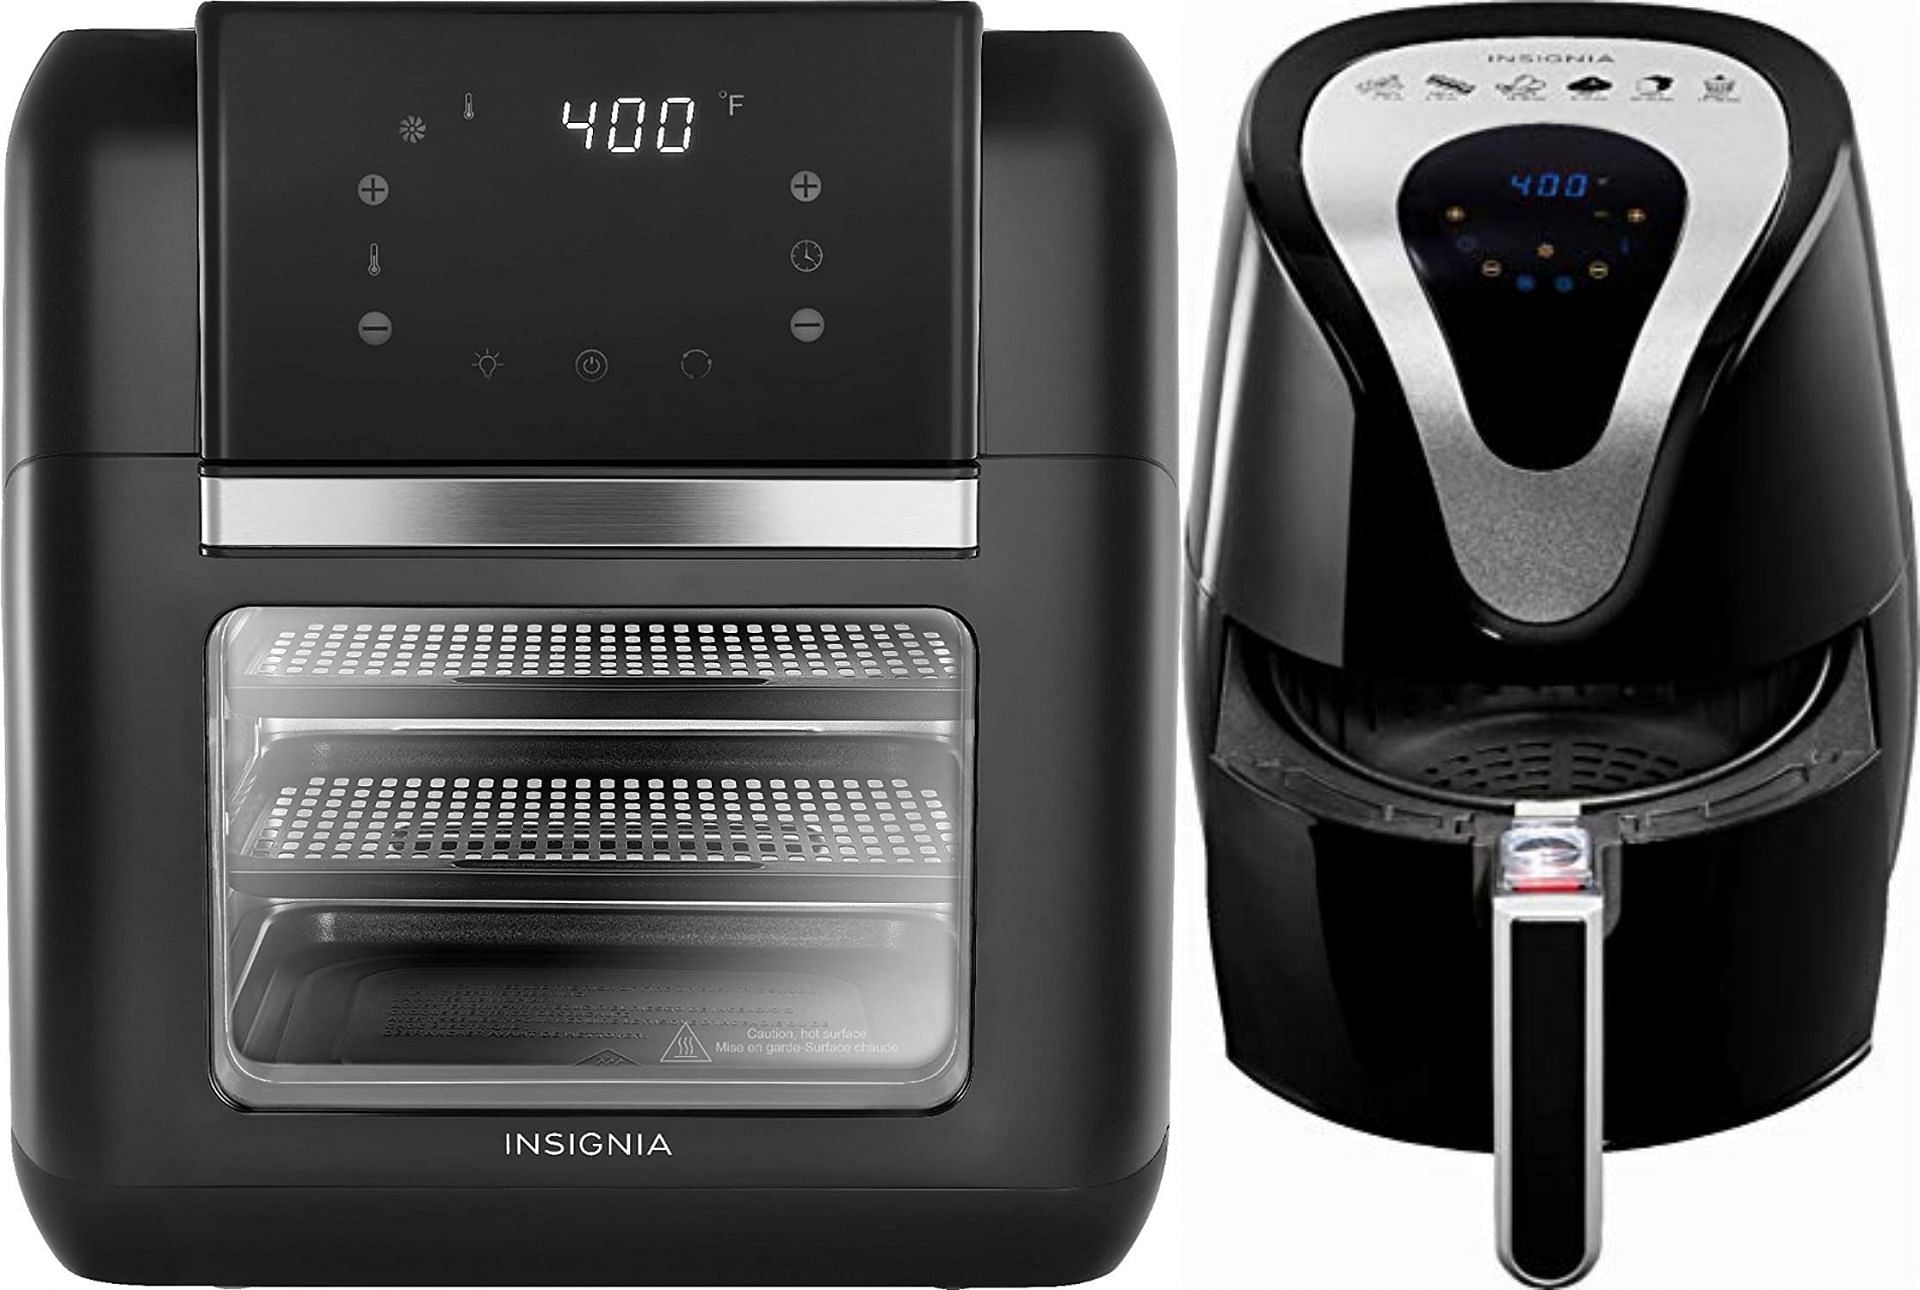 Insignia air fryers sold at Best Buy recalled over fire risk